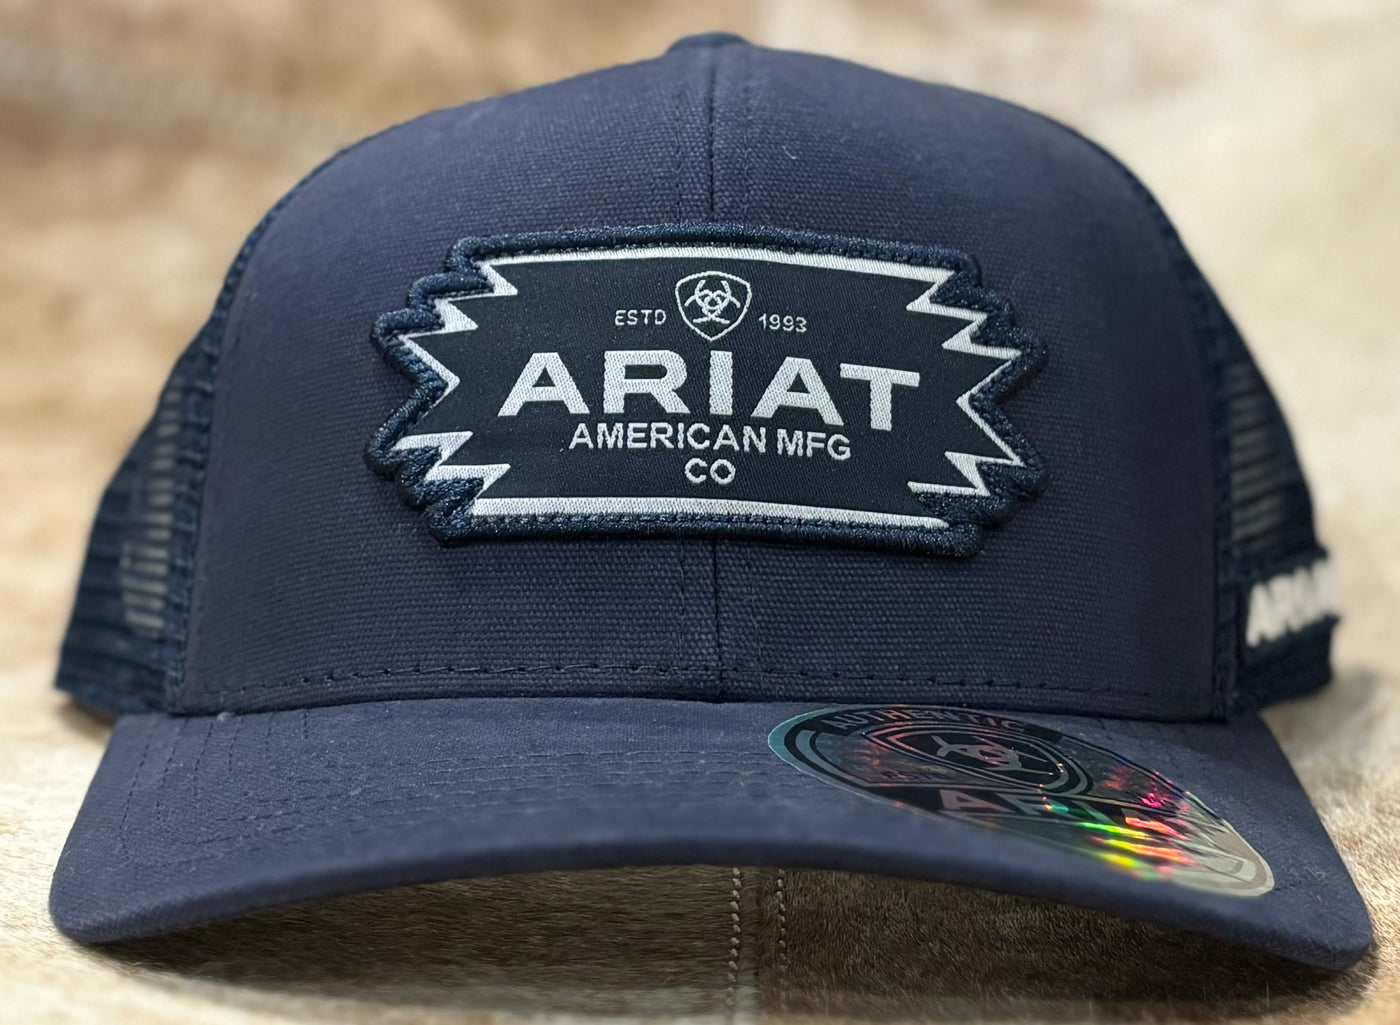 American MFG CO Hat by Ariat